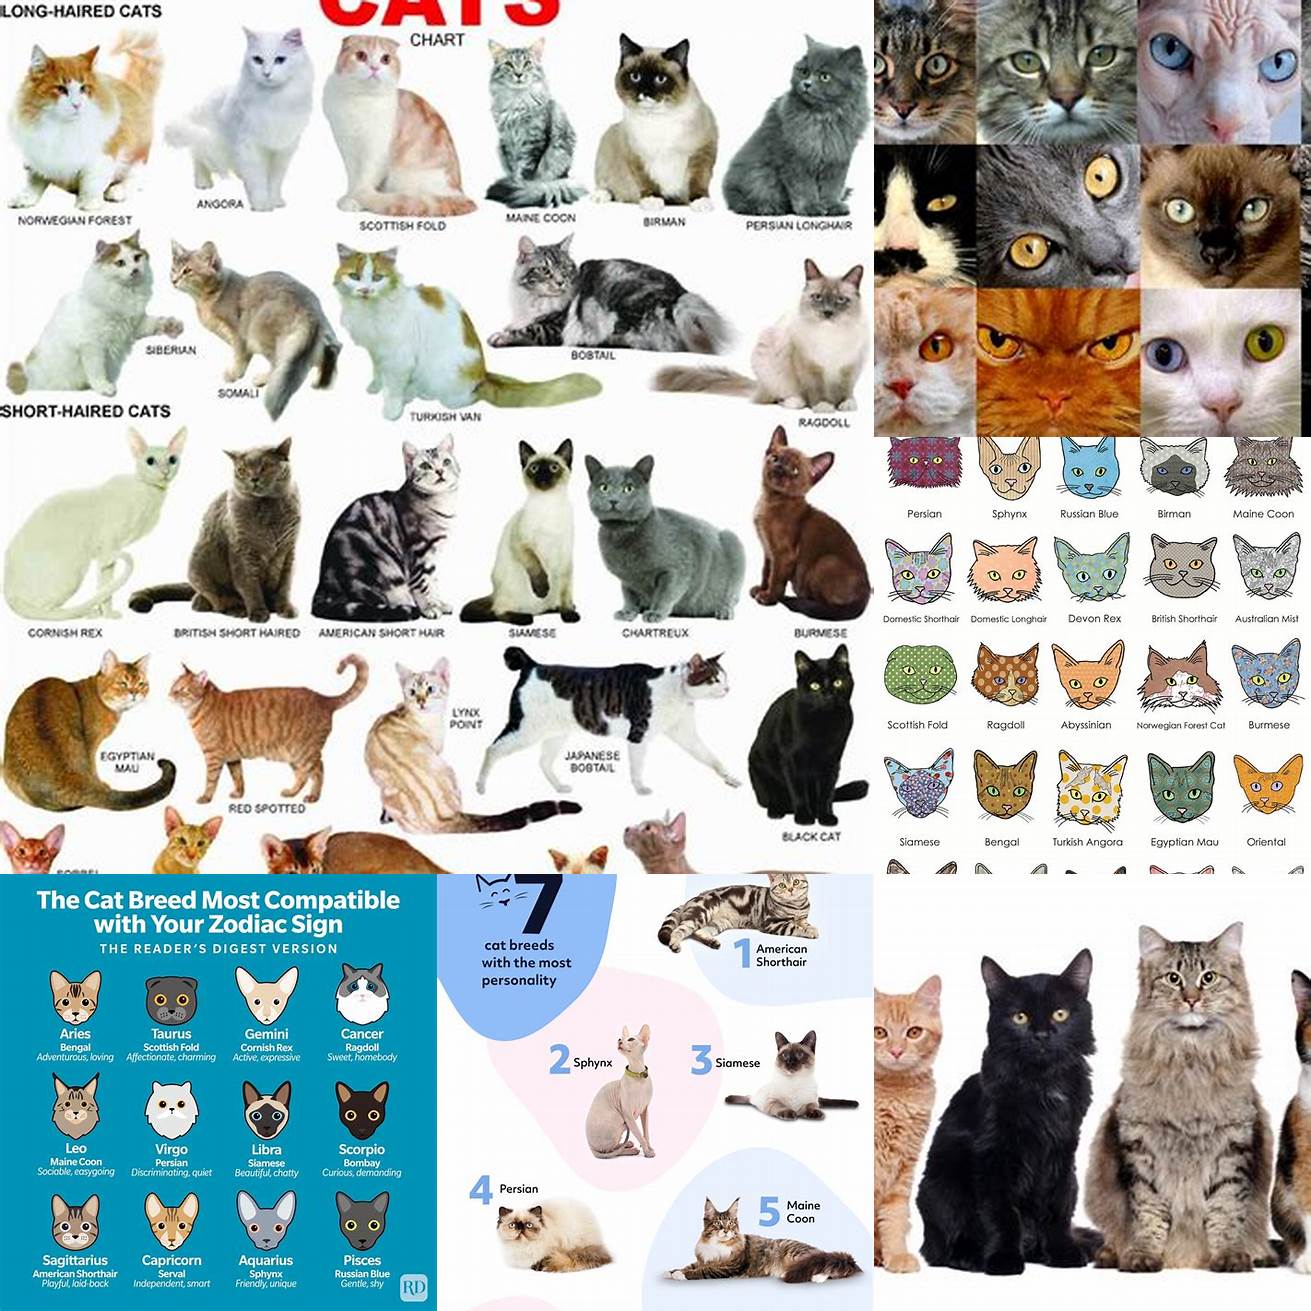 Cats of different breeds and personalities